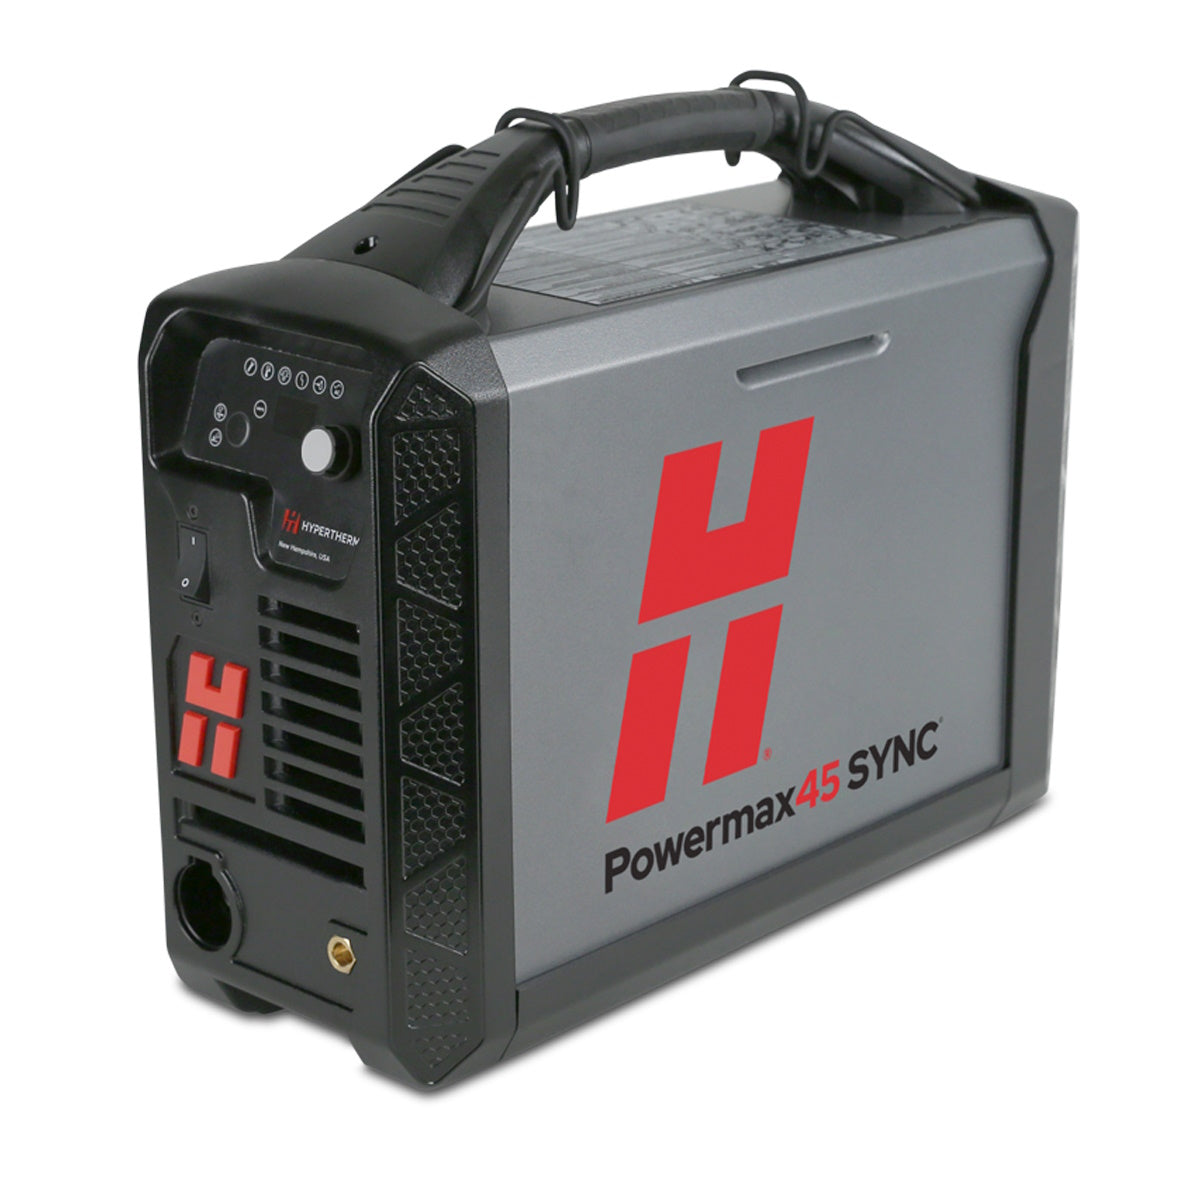 Hypertherm Powermax45 SYNC Plasma Cutter with 25ft Mechanized Torch (088580)